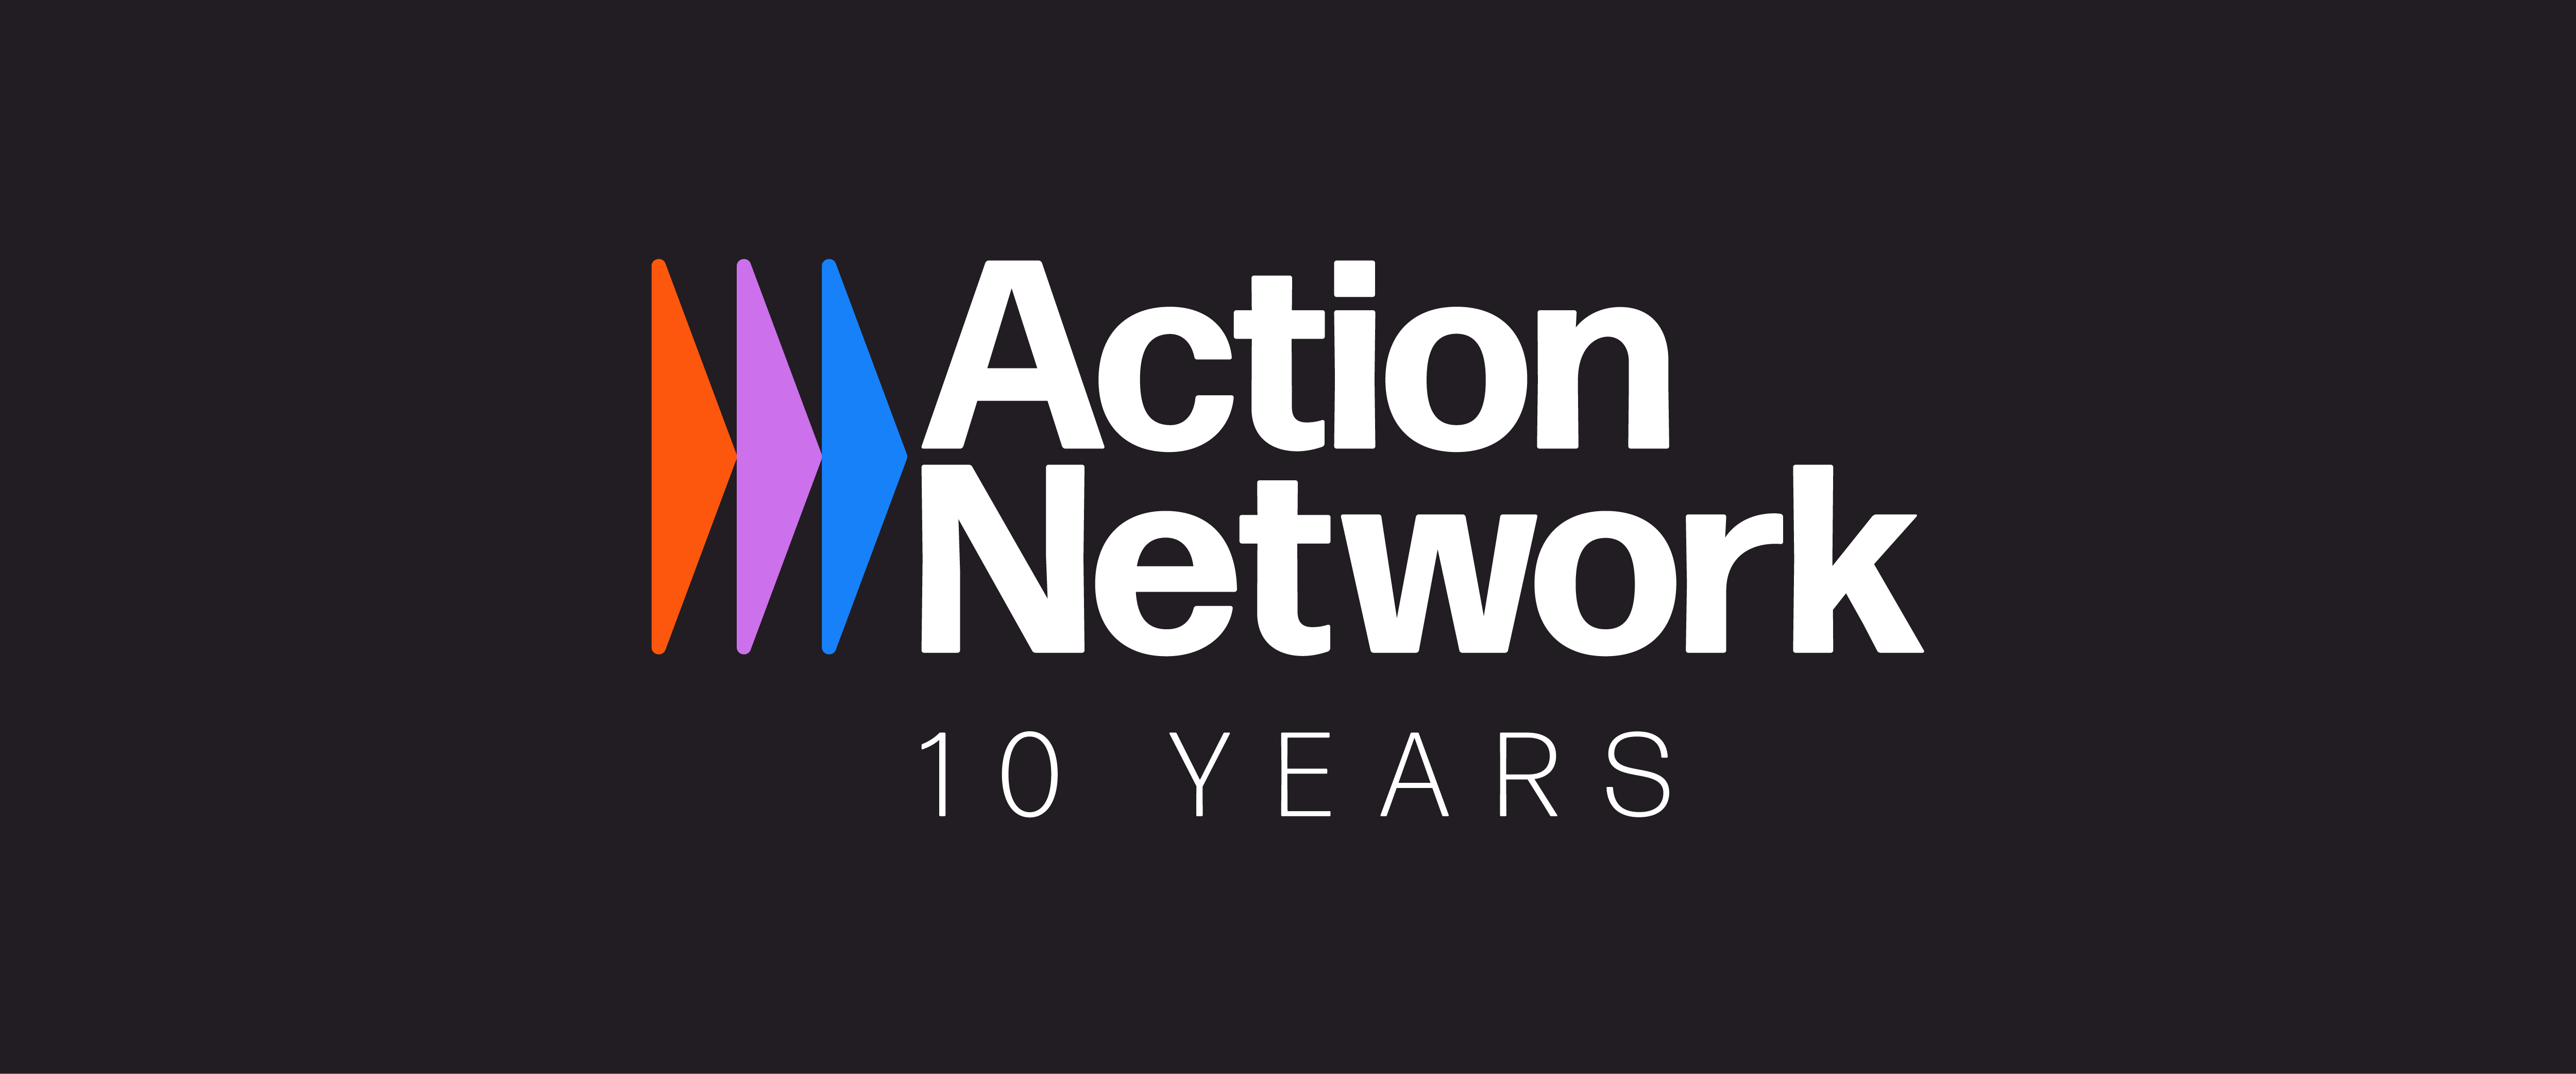 10 Years Action Network Logo